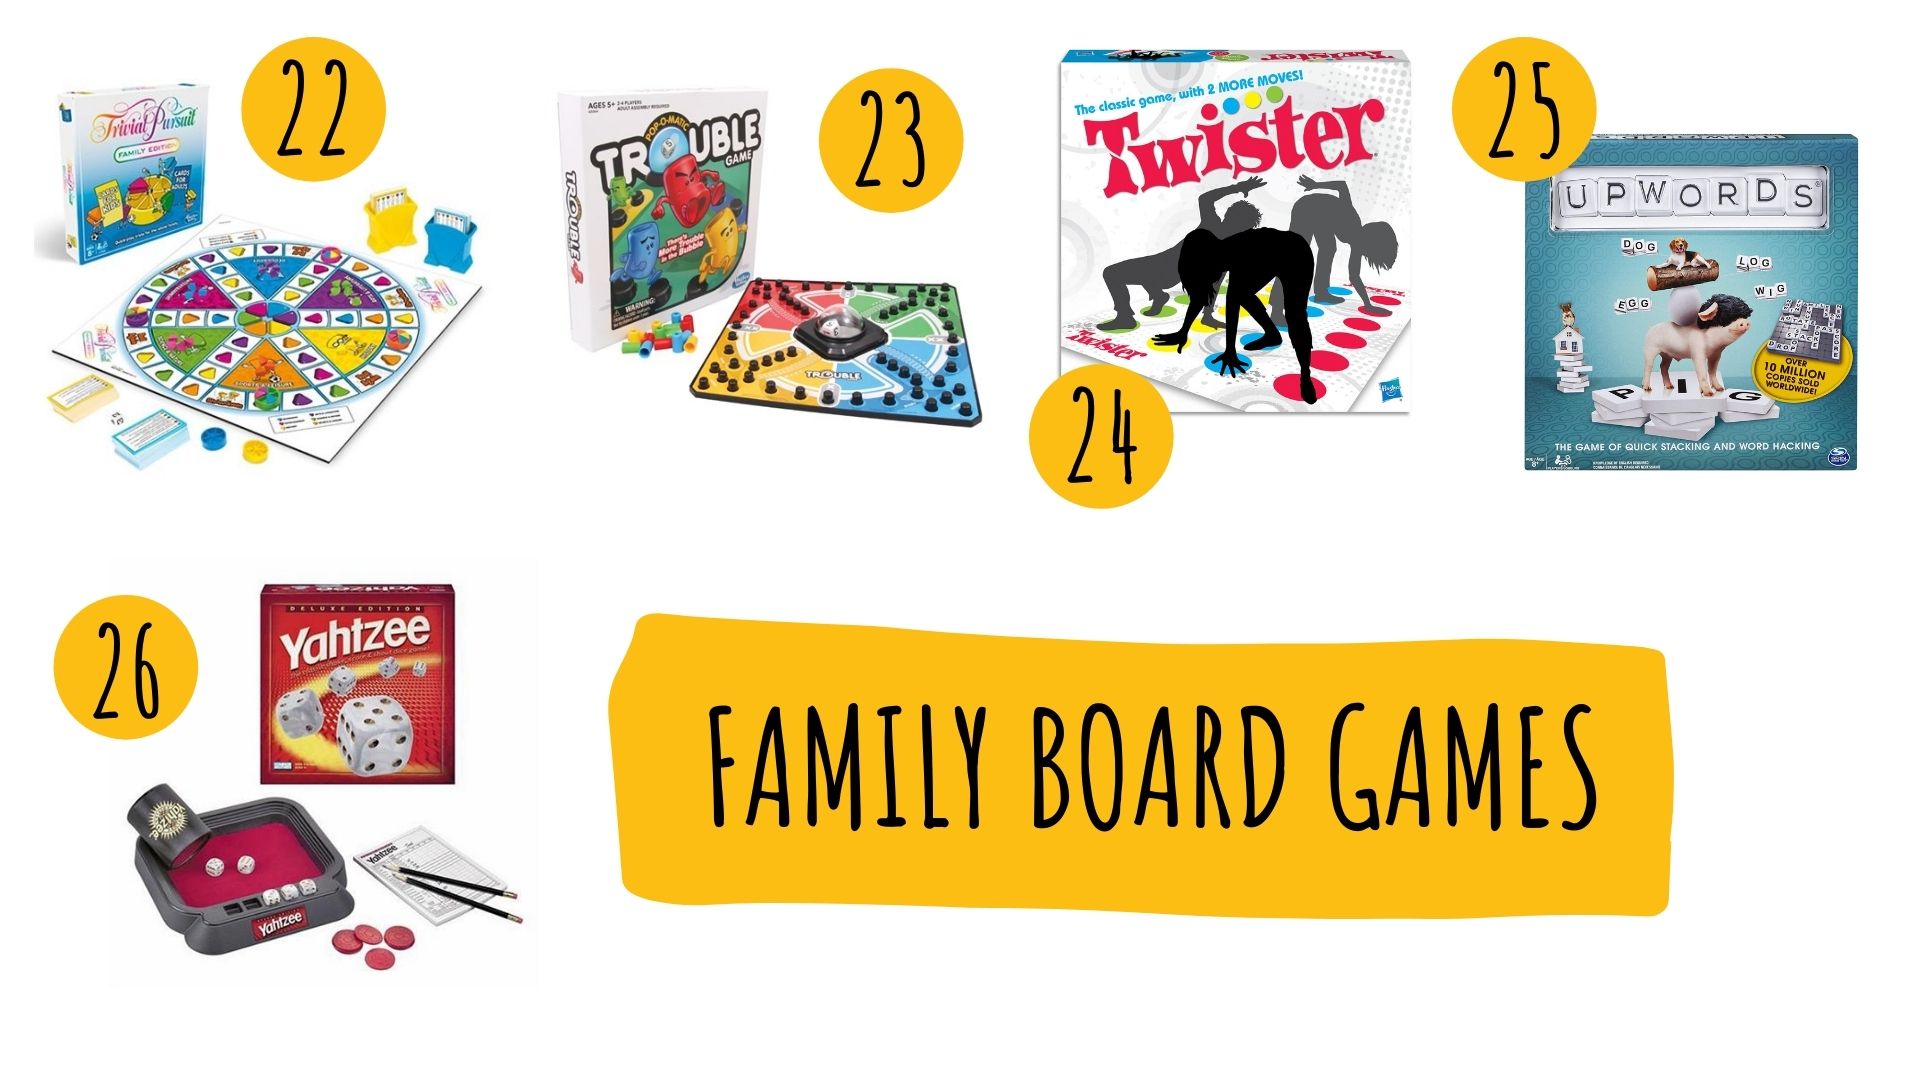 boardgames to play with kids | The best family board games